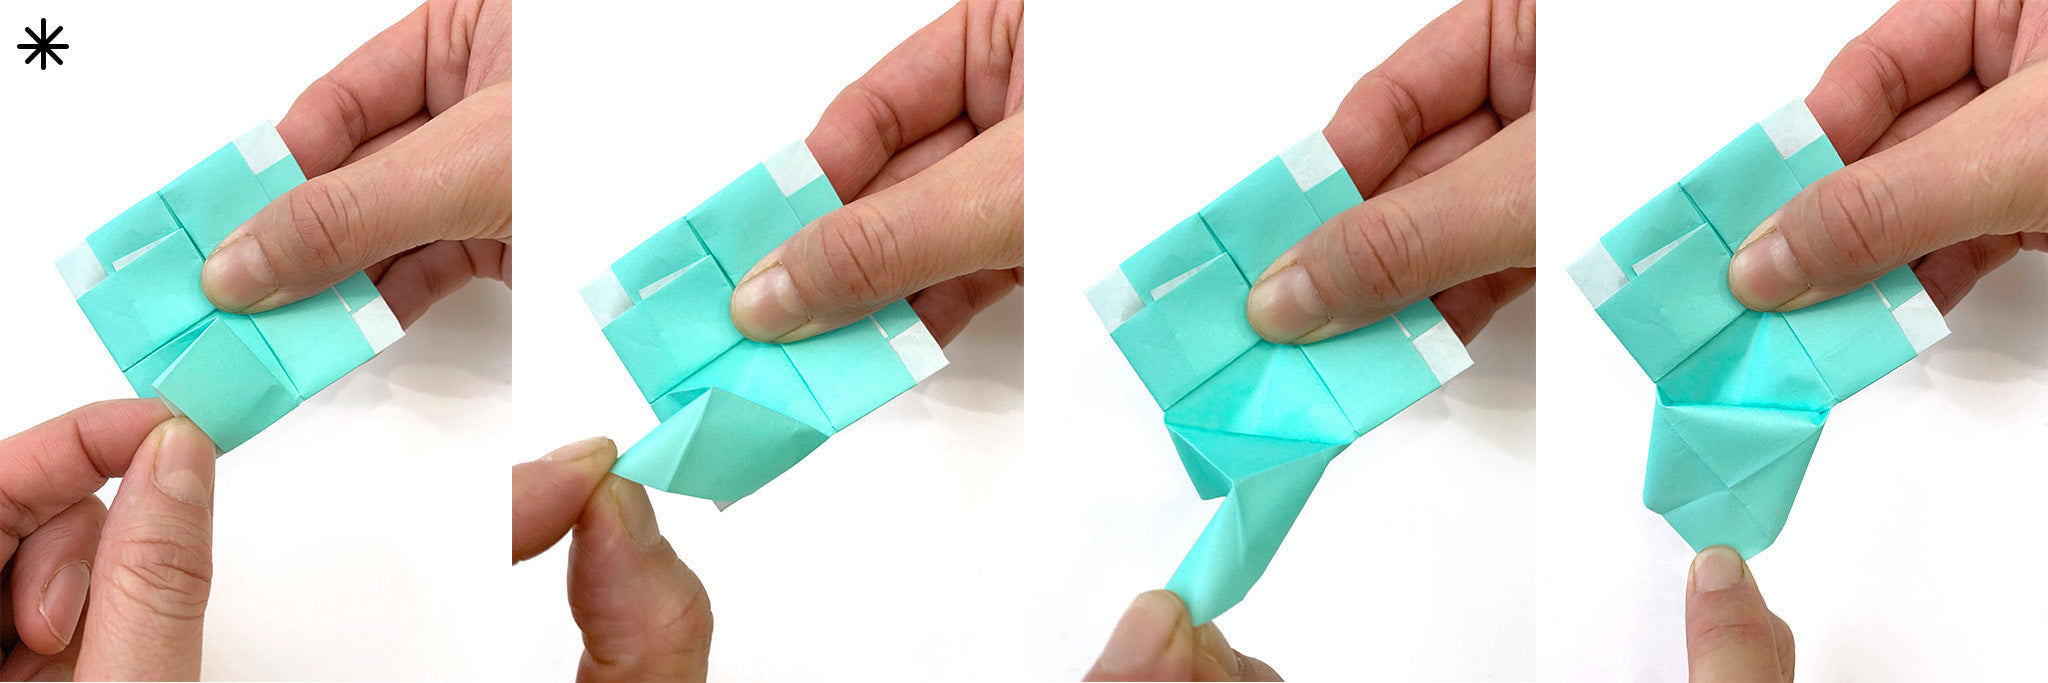 article-blog-tuto-origami-cross-complement-step-5